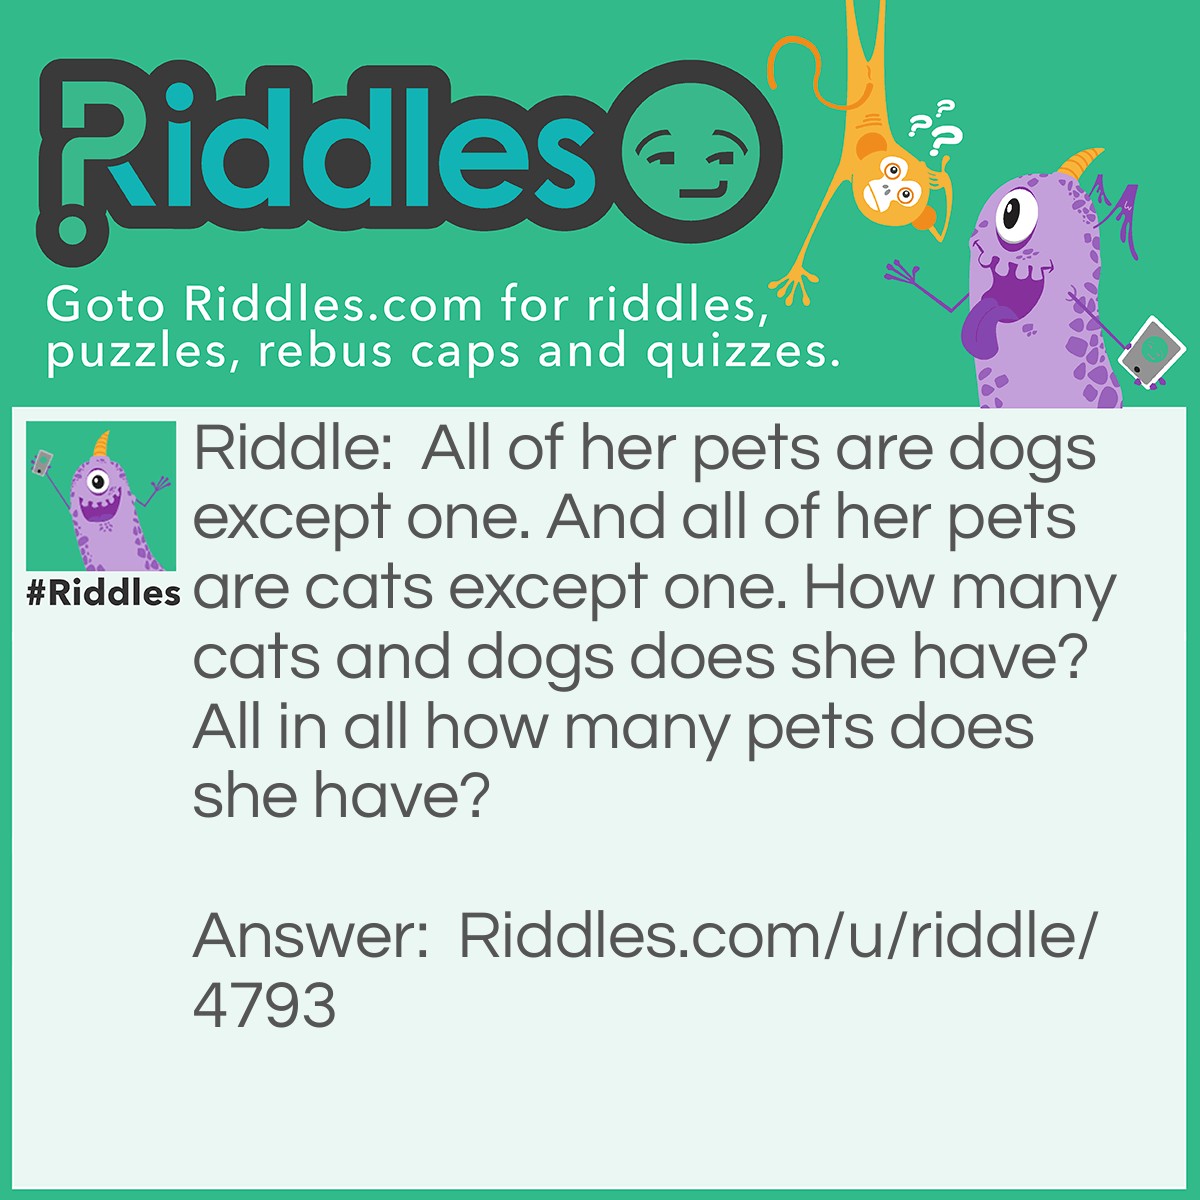 Riddle: All of her pets are dogs except one. And all of her pets are cats except one. How many cats and dogs does she have? All in all how many pets does she have? Answer: 1 cat 1 dog ( 2 pets ).